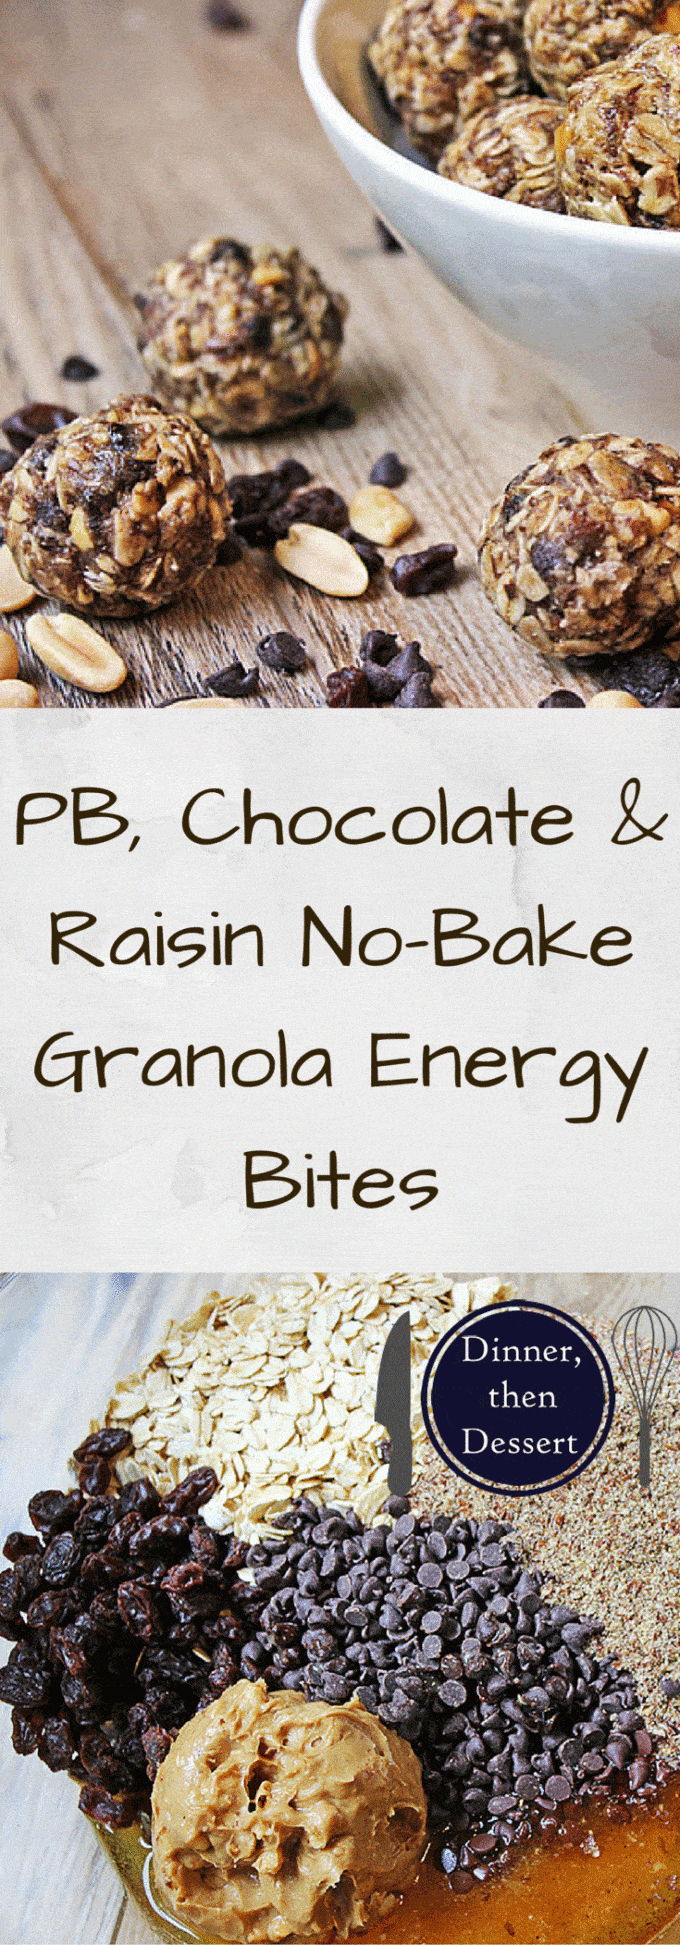 No bake energy bites that taste like a cross between your three favorite cookies: Chocolate Chip, Peanut Butter and Oatmeal Raisin. The addition of flax meal kick up the flavor and the good-for-you-factor!